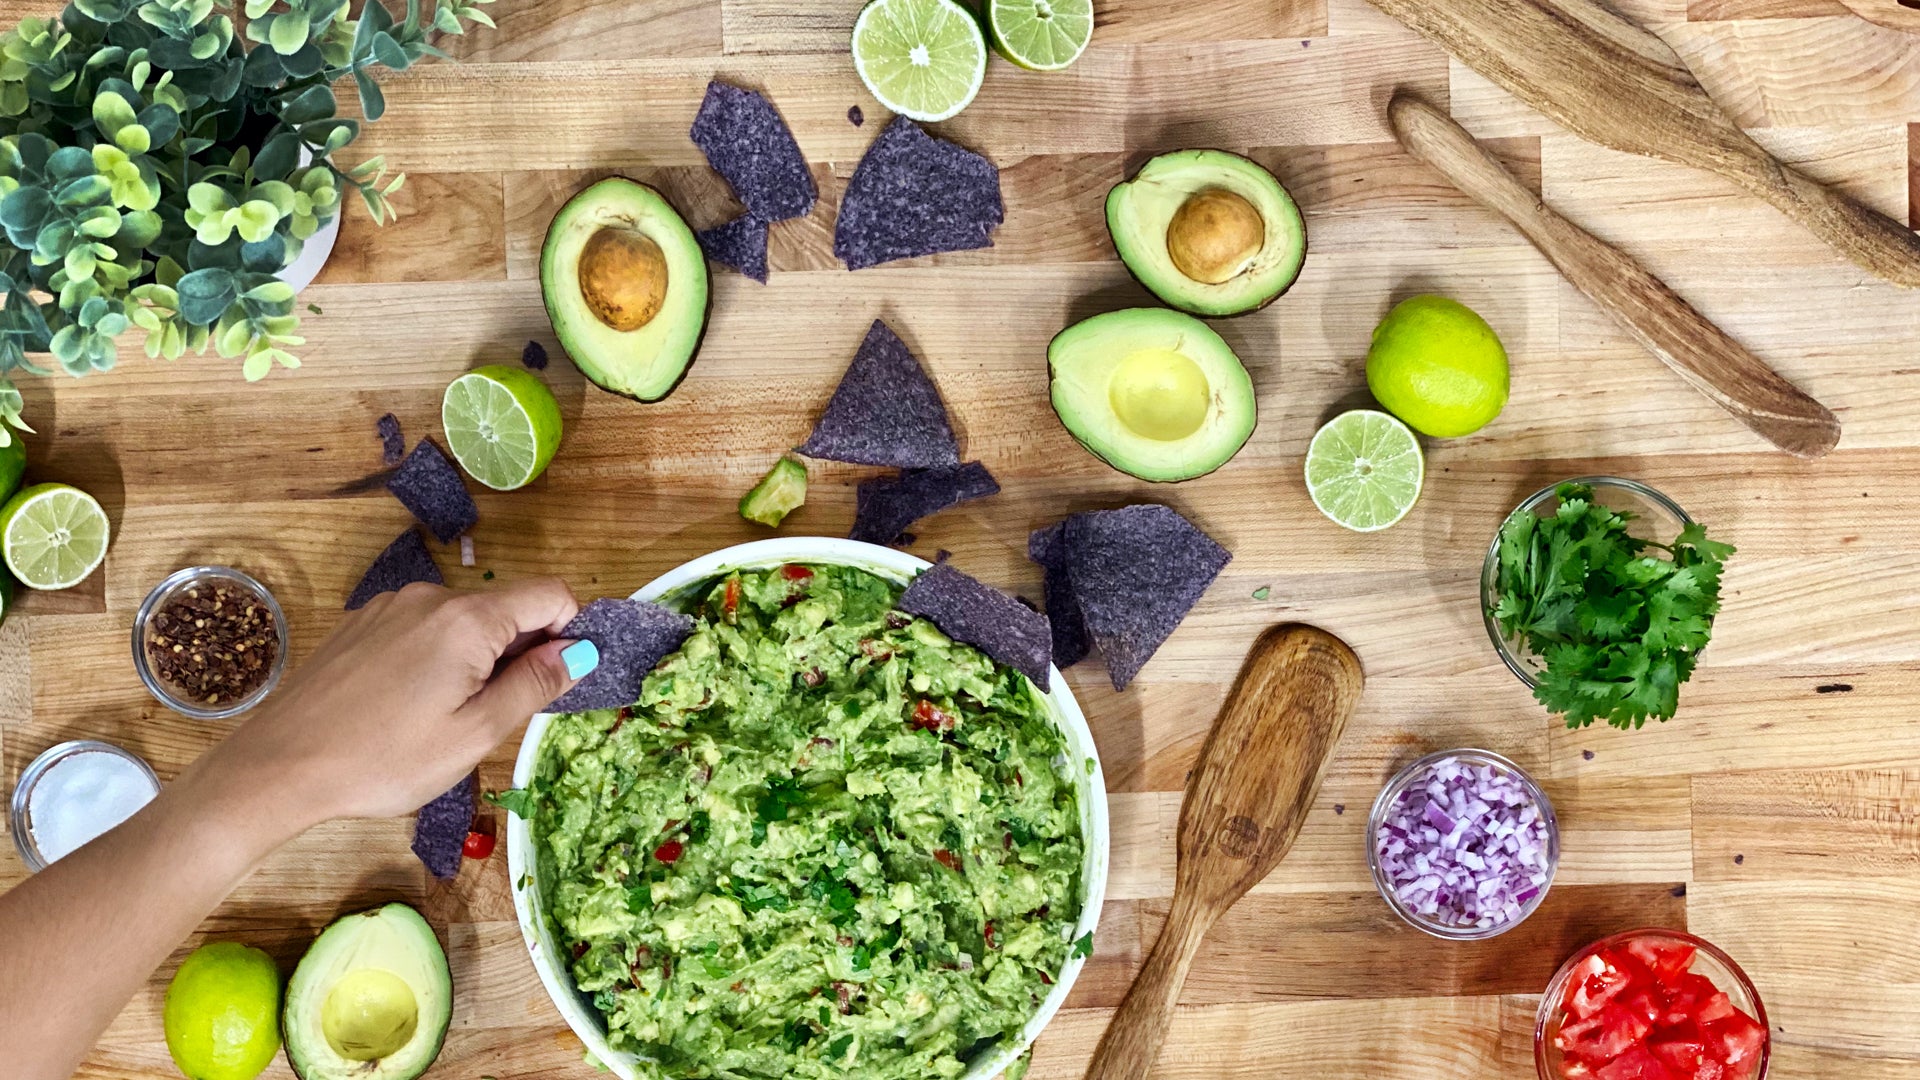 Homemade Guacamole with Mad Hungry Spurtles